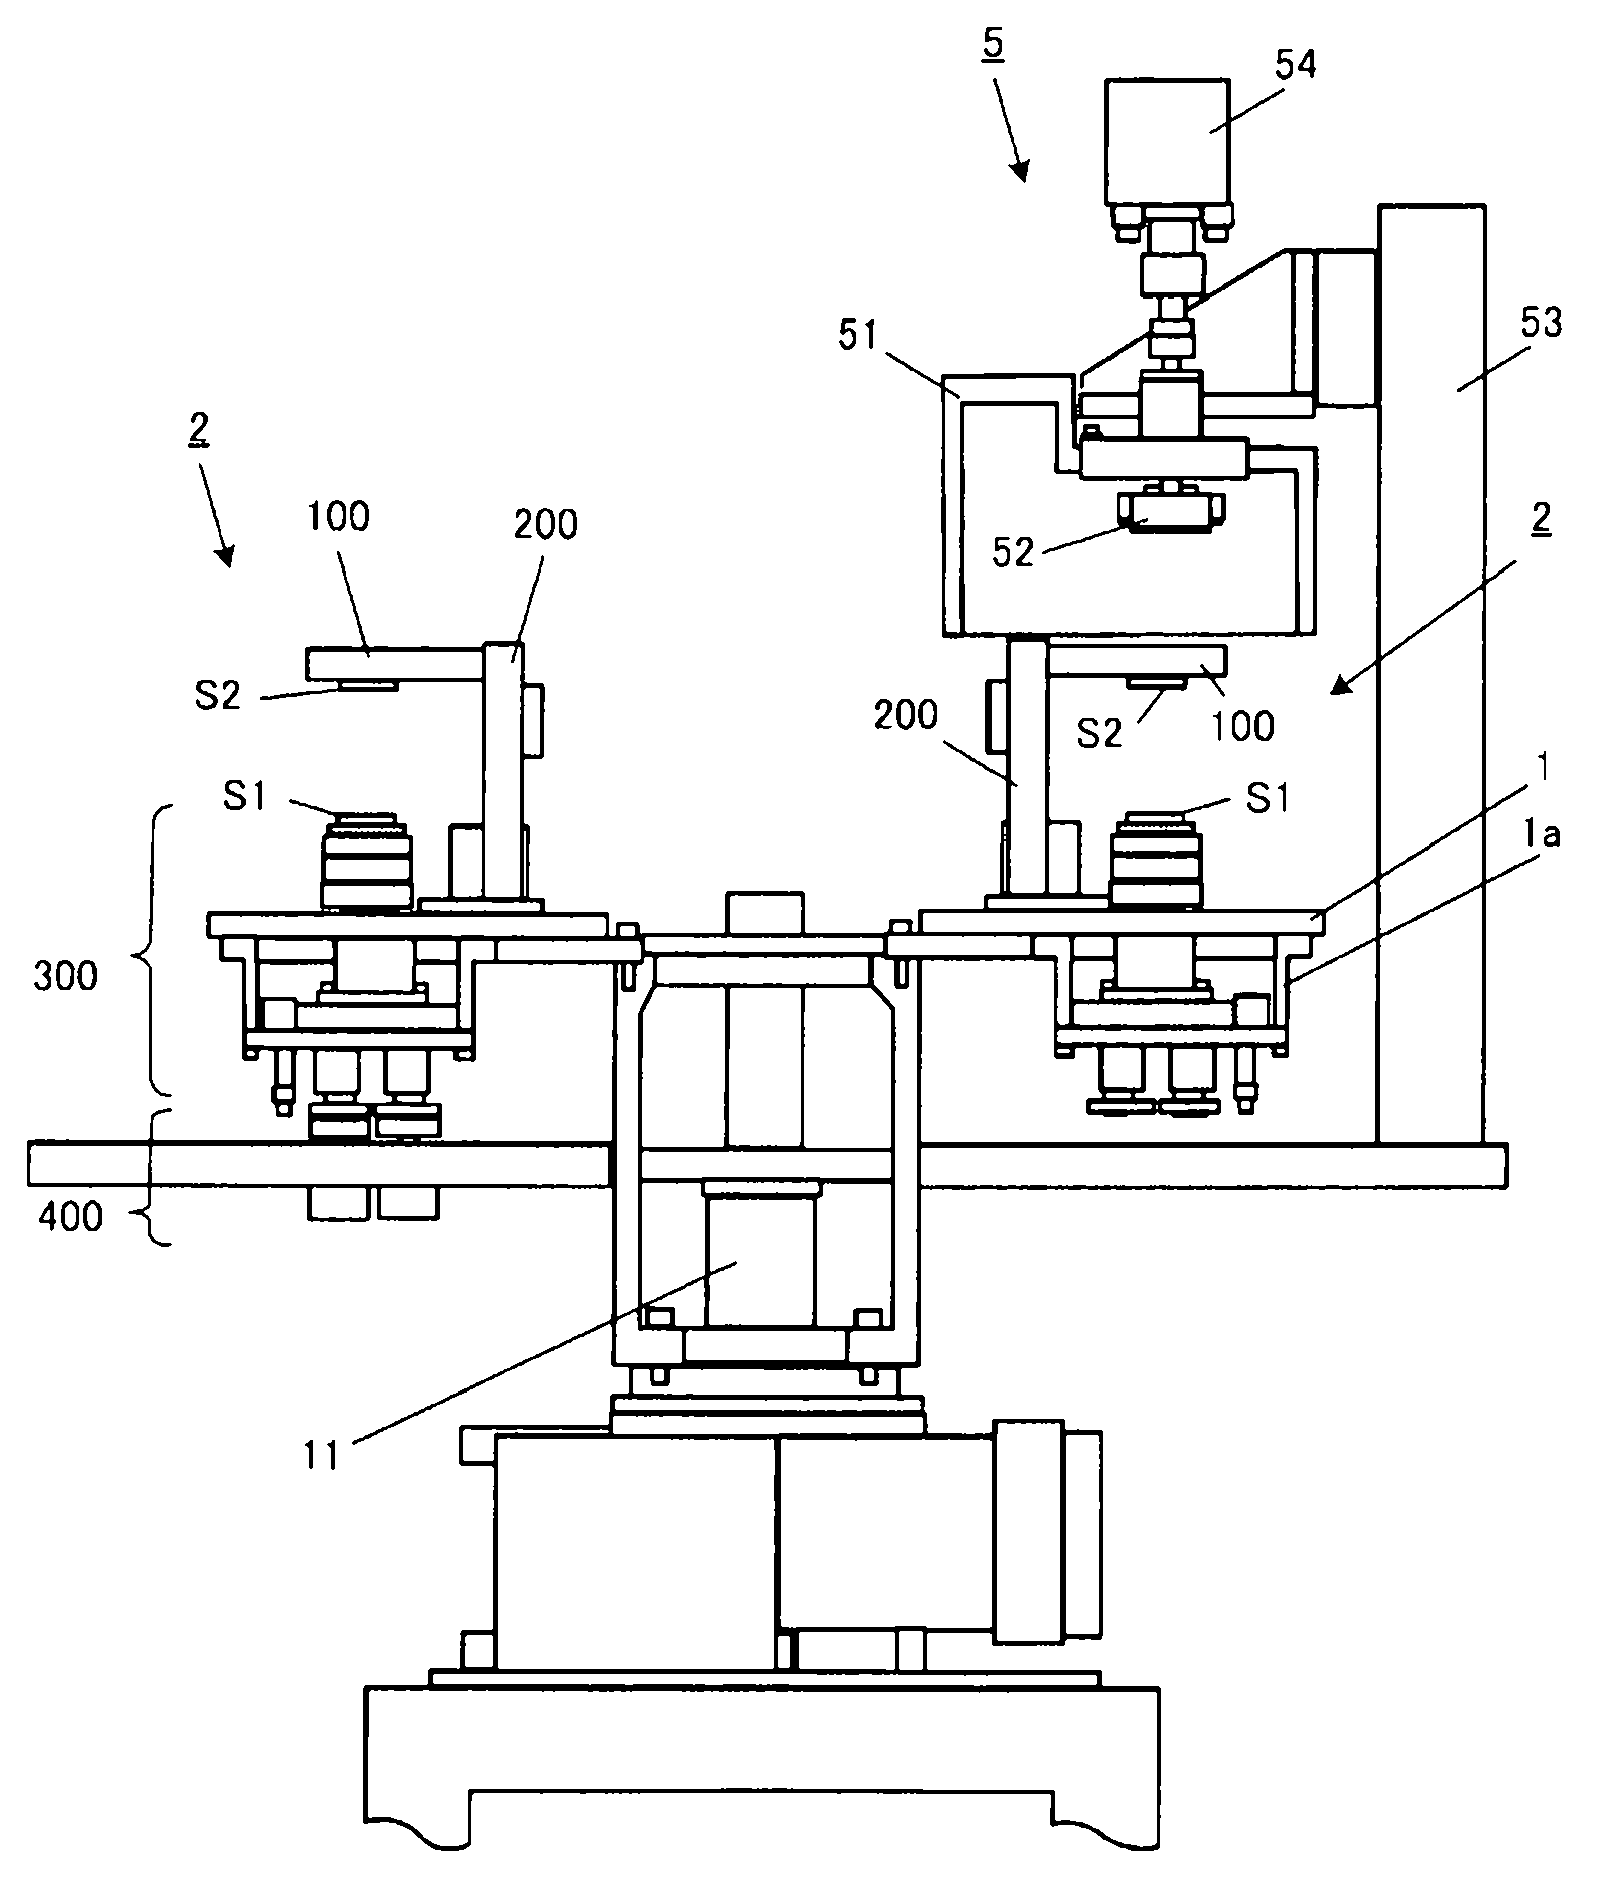 Bonding apparatus and method for controlling same